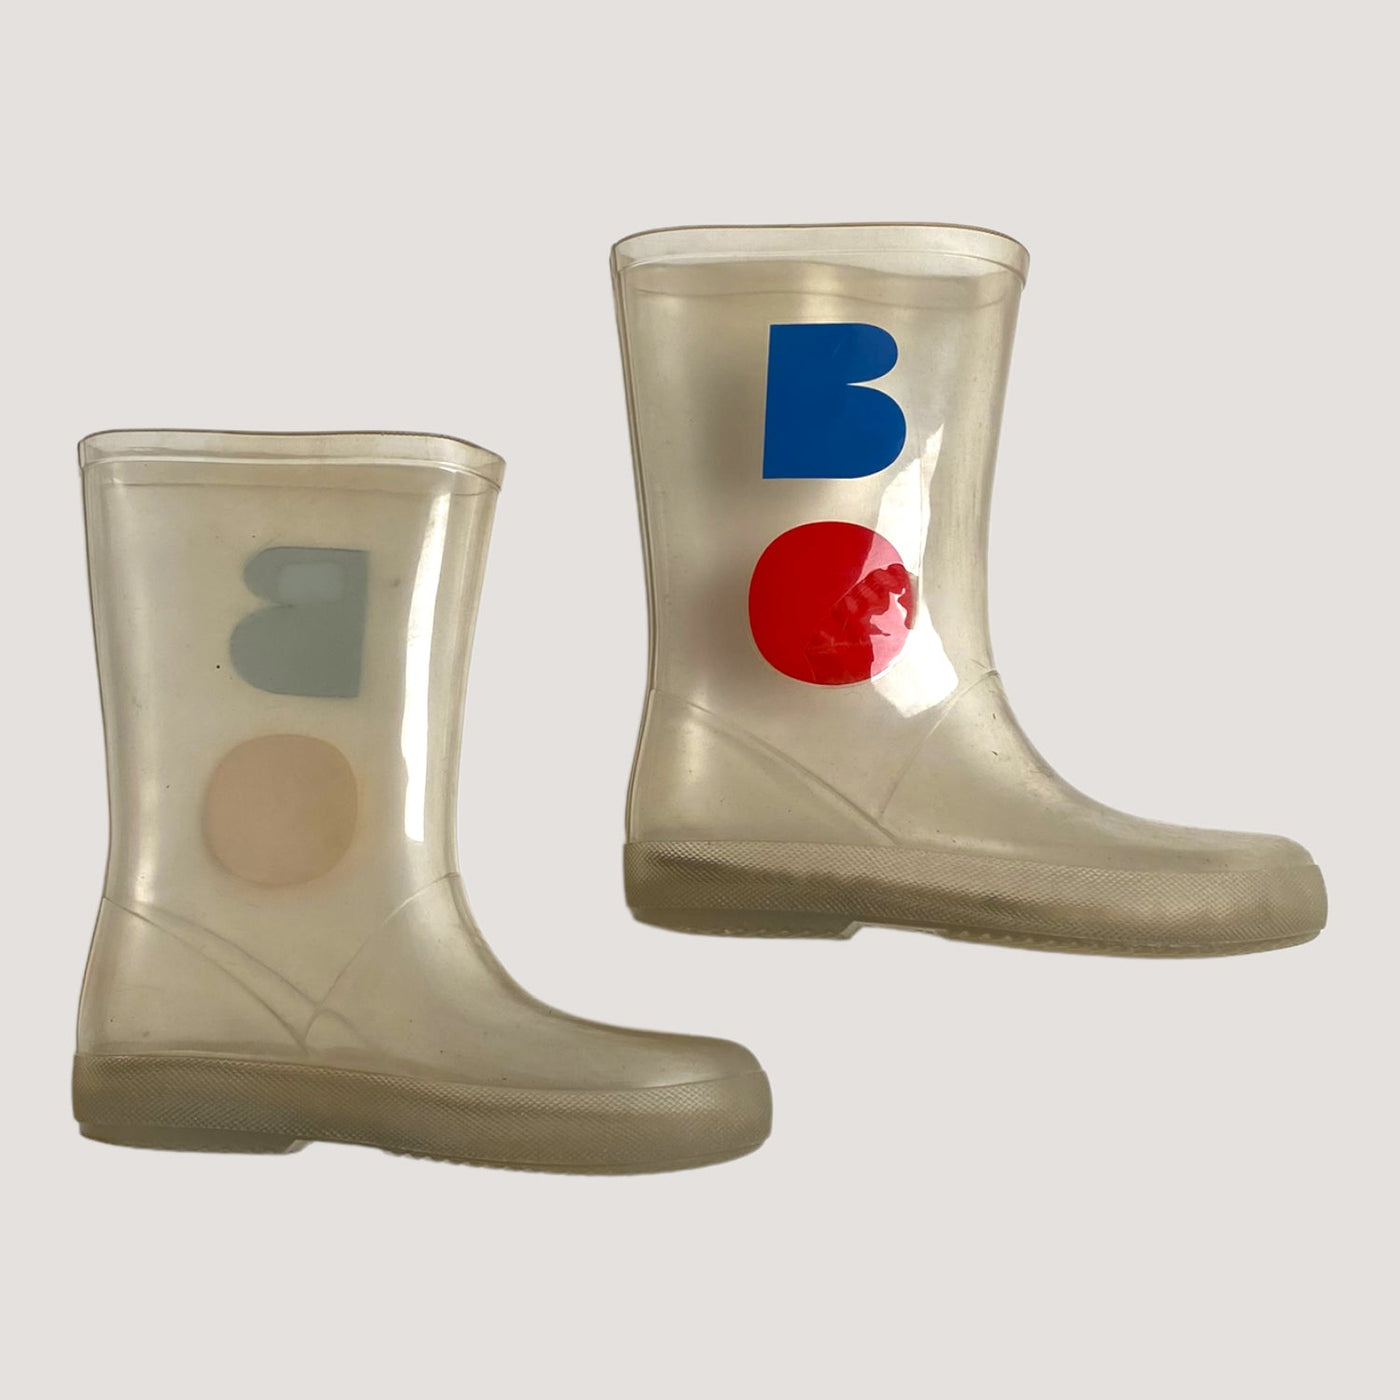 rubber boots, see-through | 30